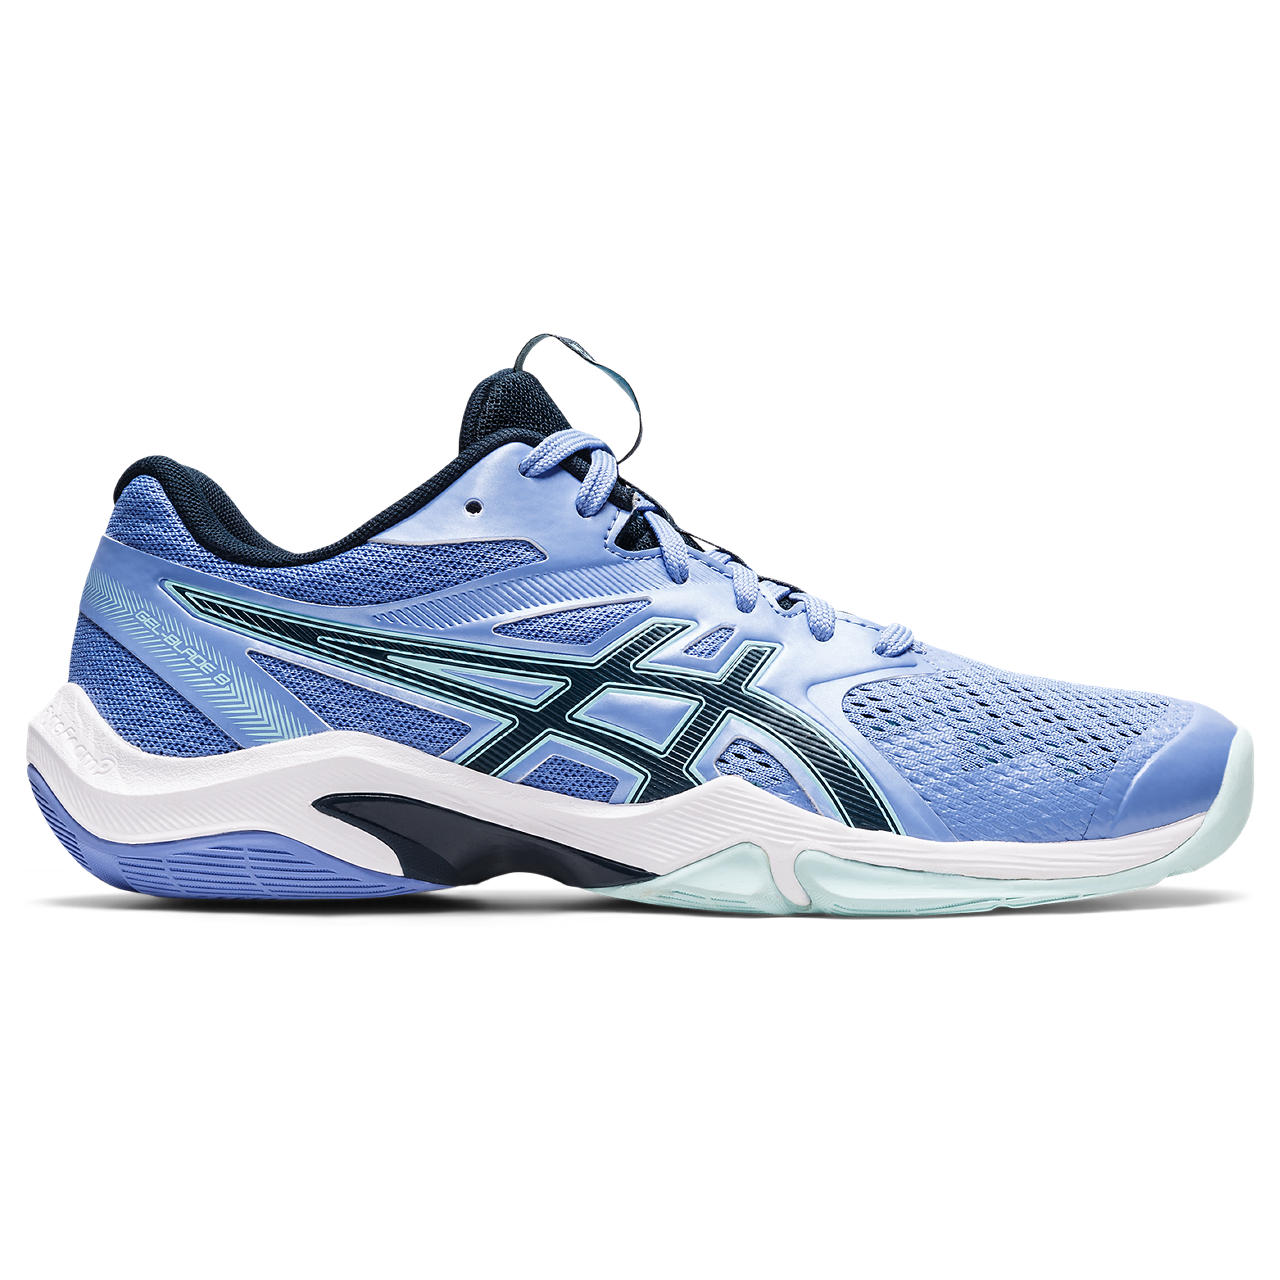 Asics Blade 8 Women's Indoor Court Shoe (Periwinkle Blue/French Blue) | RacquetGuys.ca